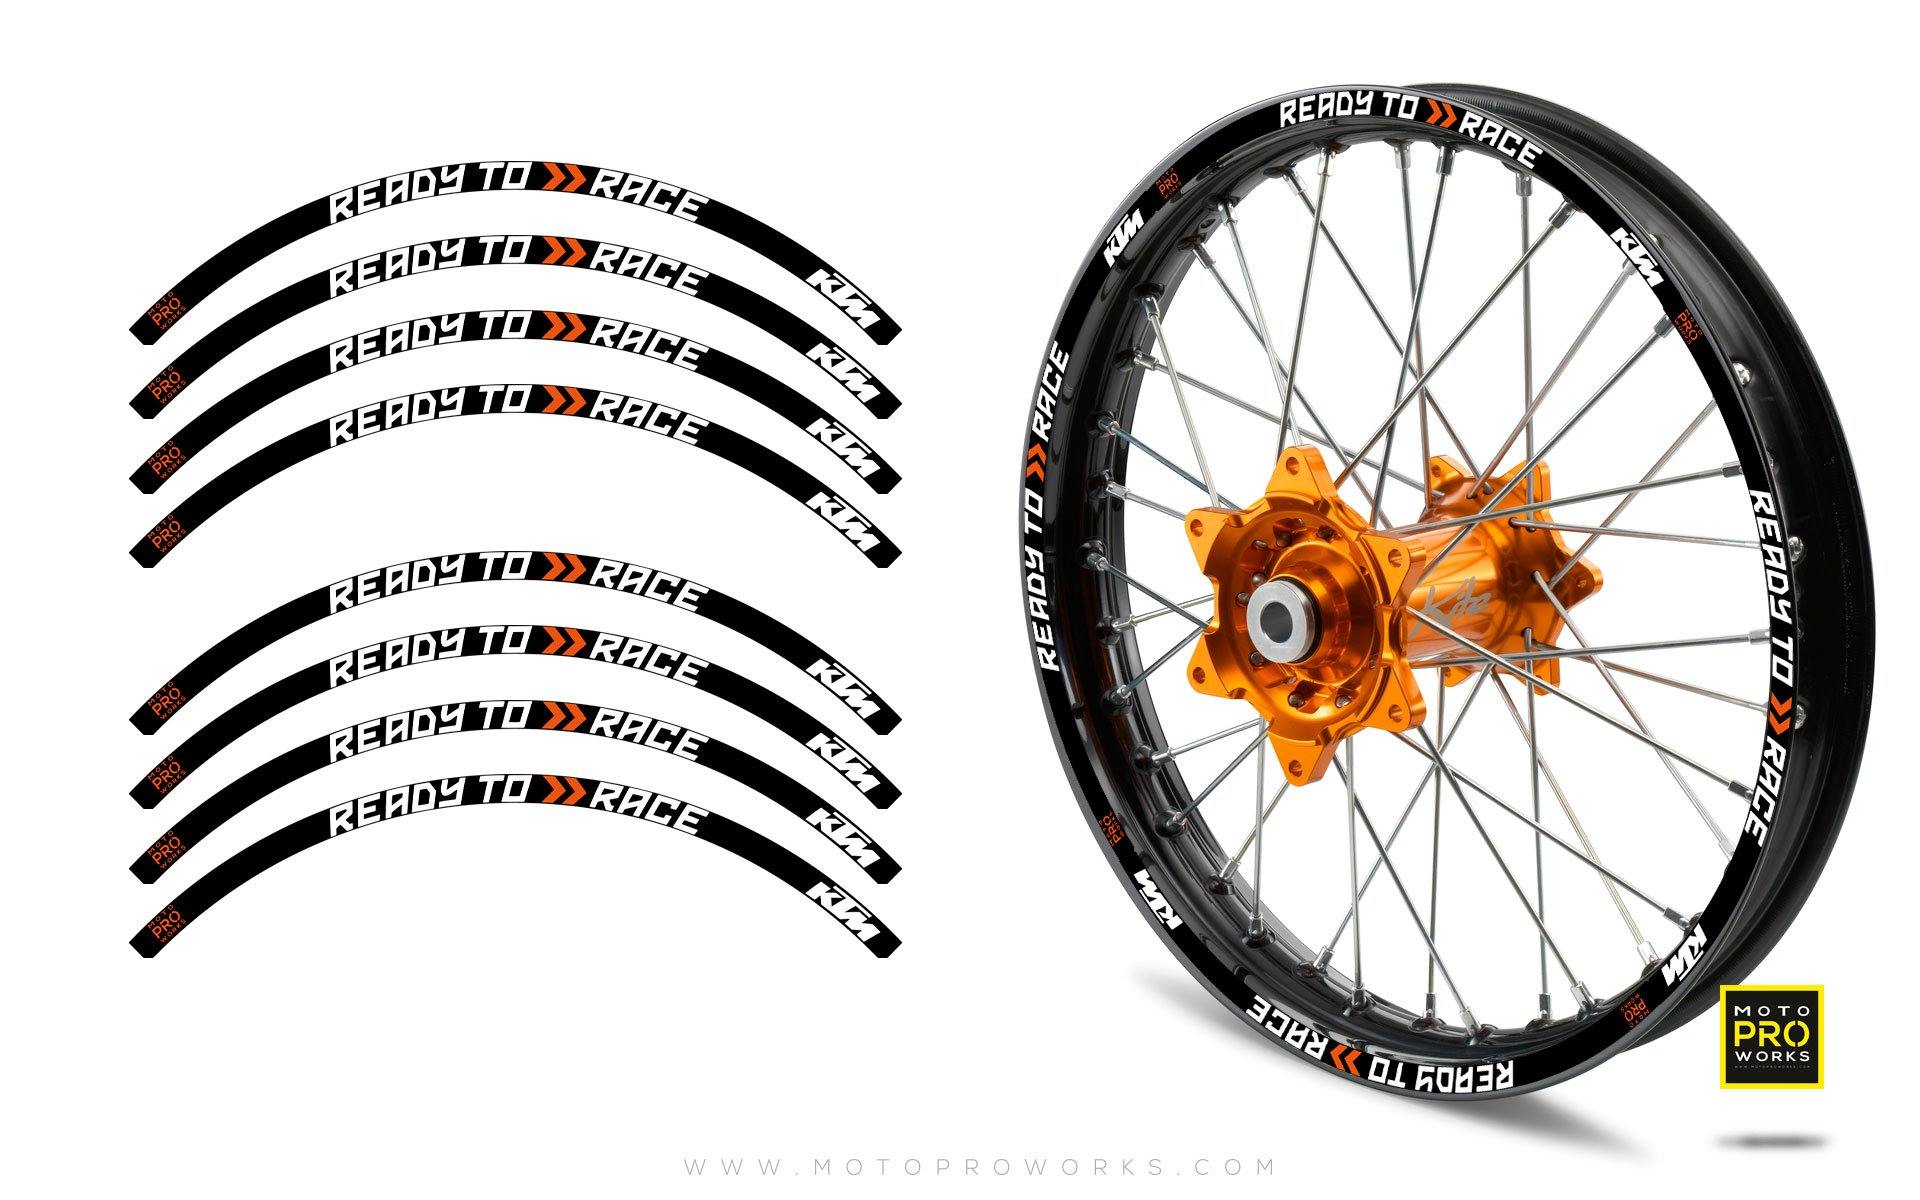 Rim Stripes - KTM "Ready To Race" (Black) - MotoProWorks | Decals and Bike Graphic kit